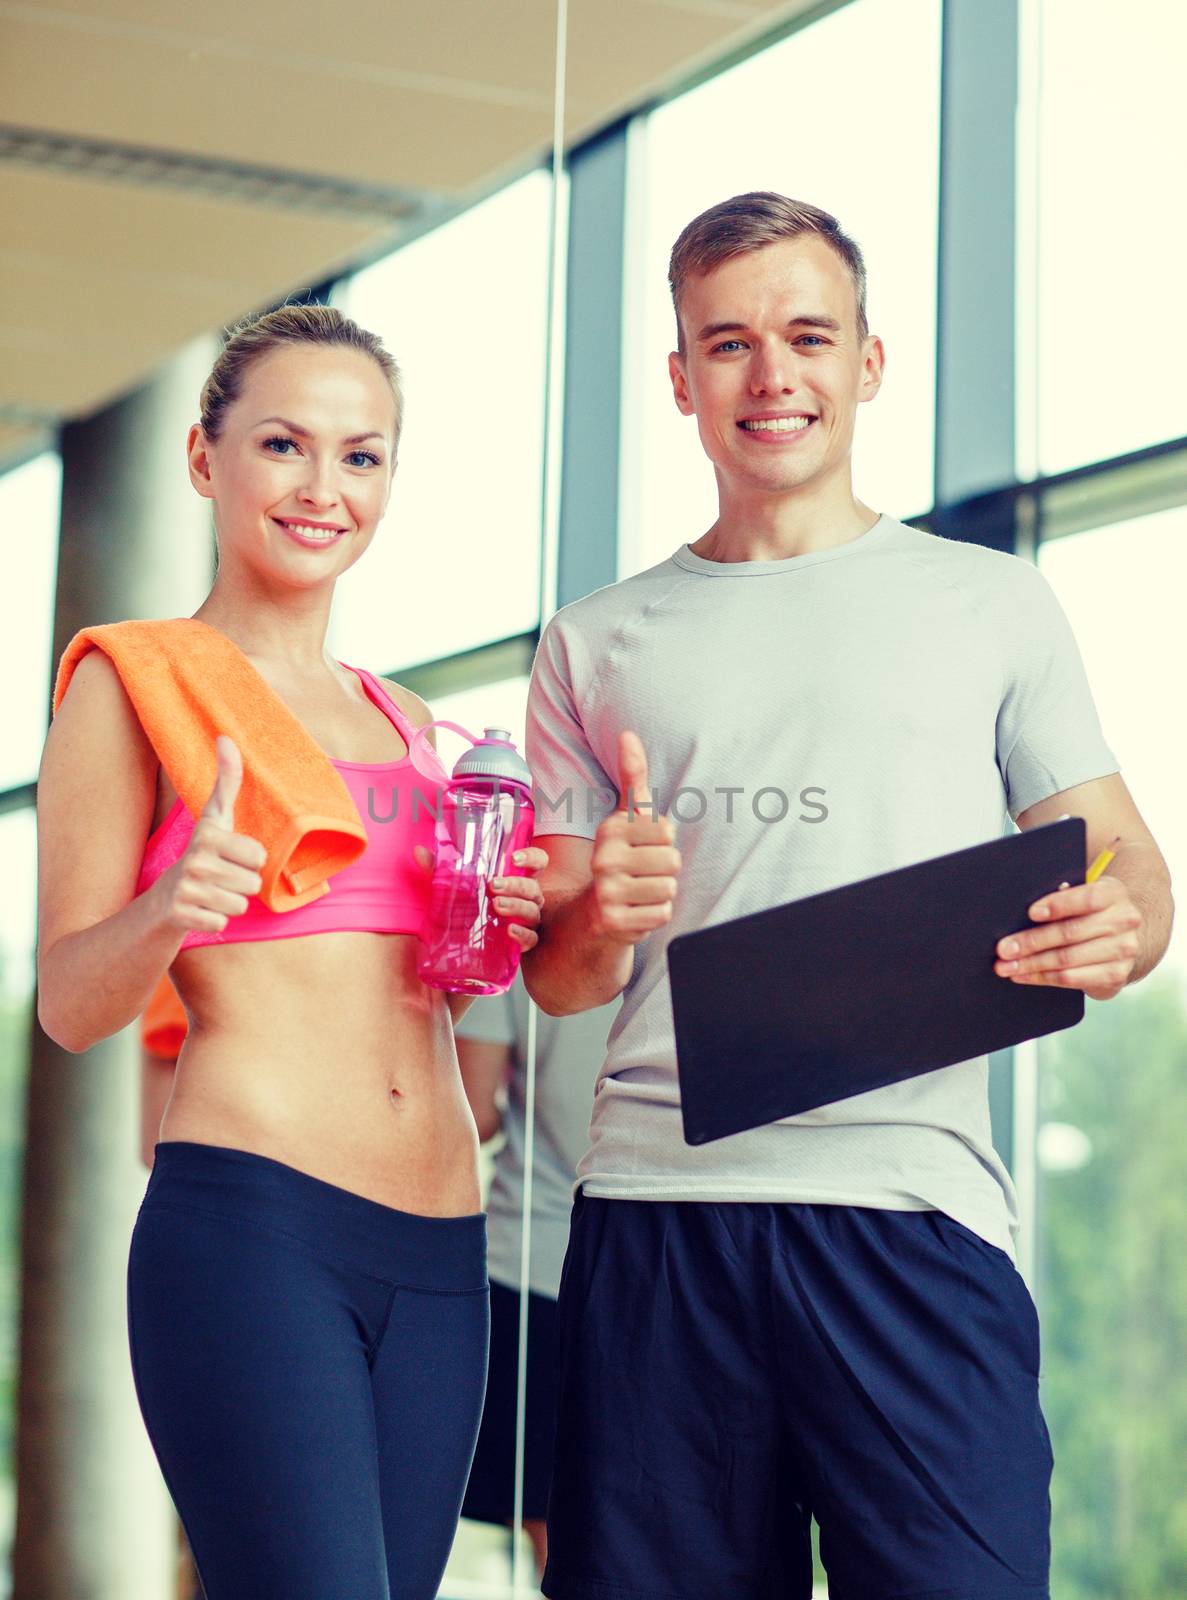 fitness, sport, exercising and diet concept - smiling young woman with personal trainer after training in gym showing thumb up